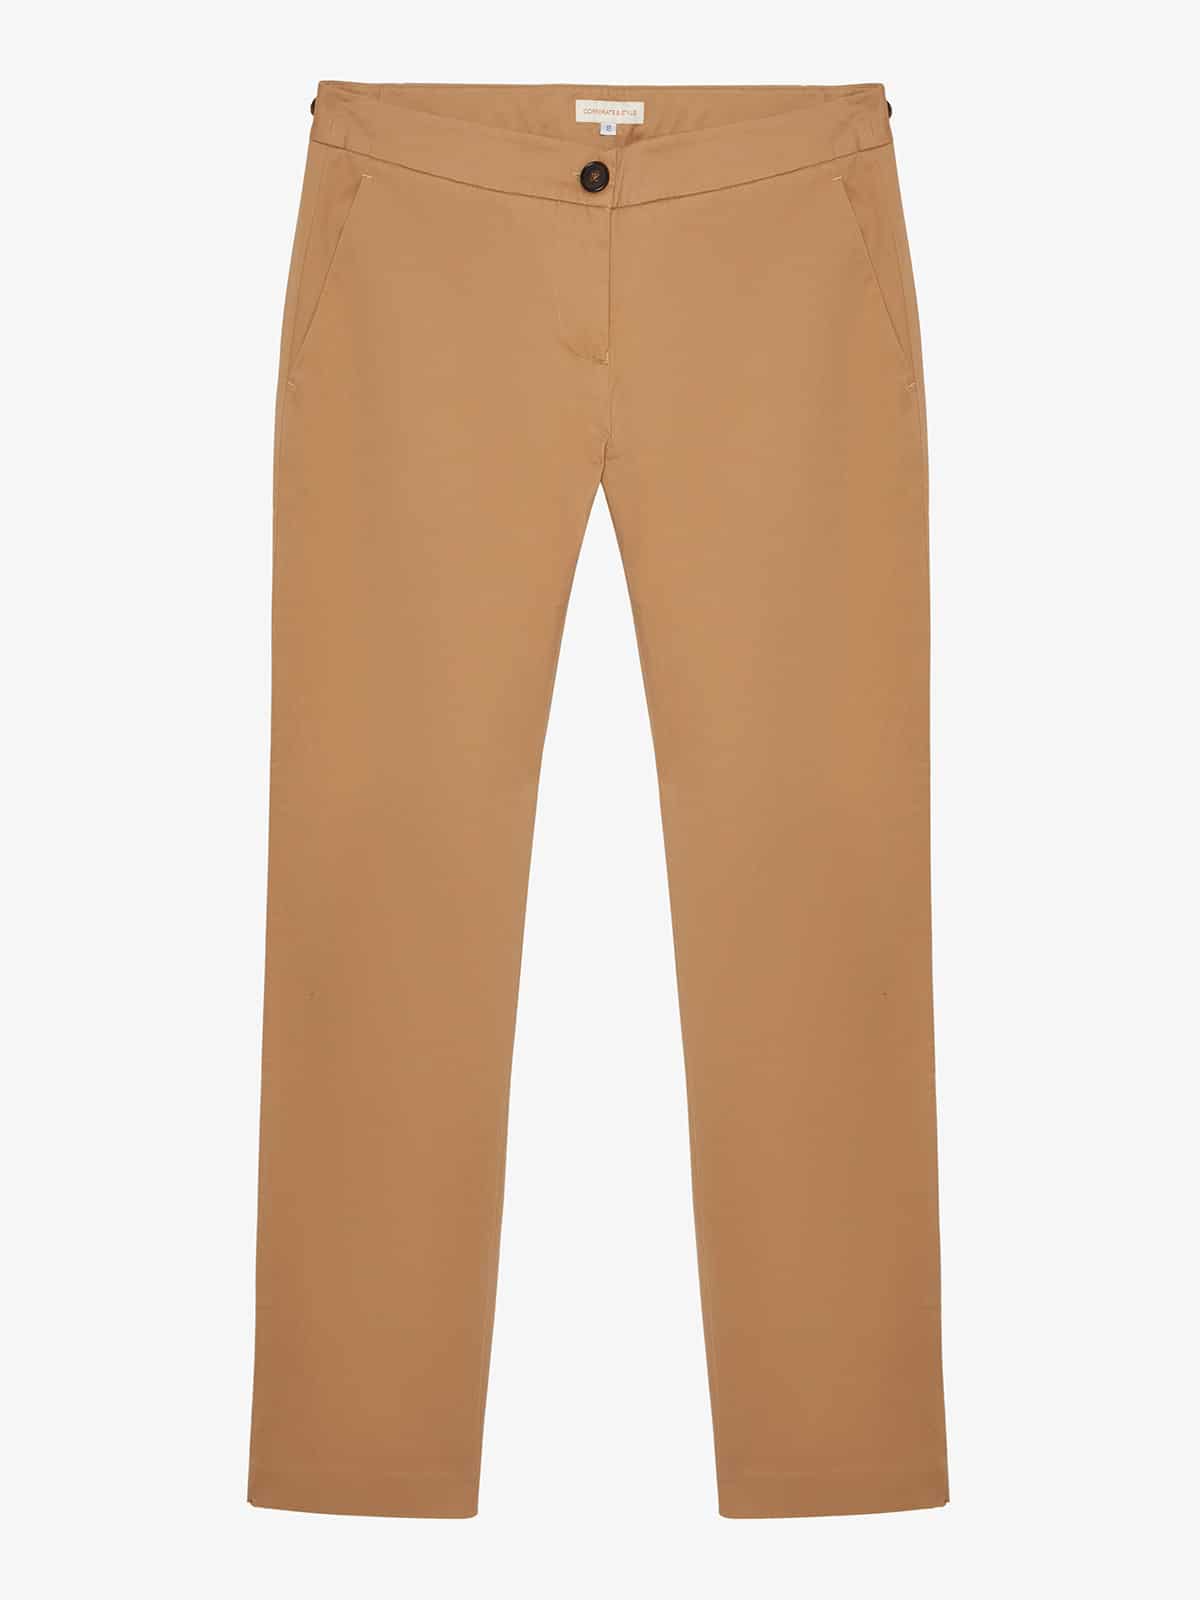 Natural Drumohr Synthetic Trouser in Camel Womens Clothing Trousers Slacks and Chinos Straight-leg trousers 